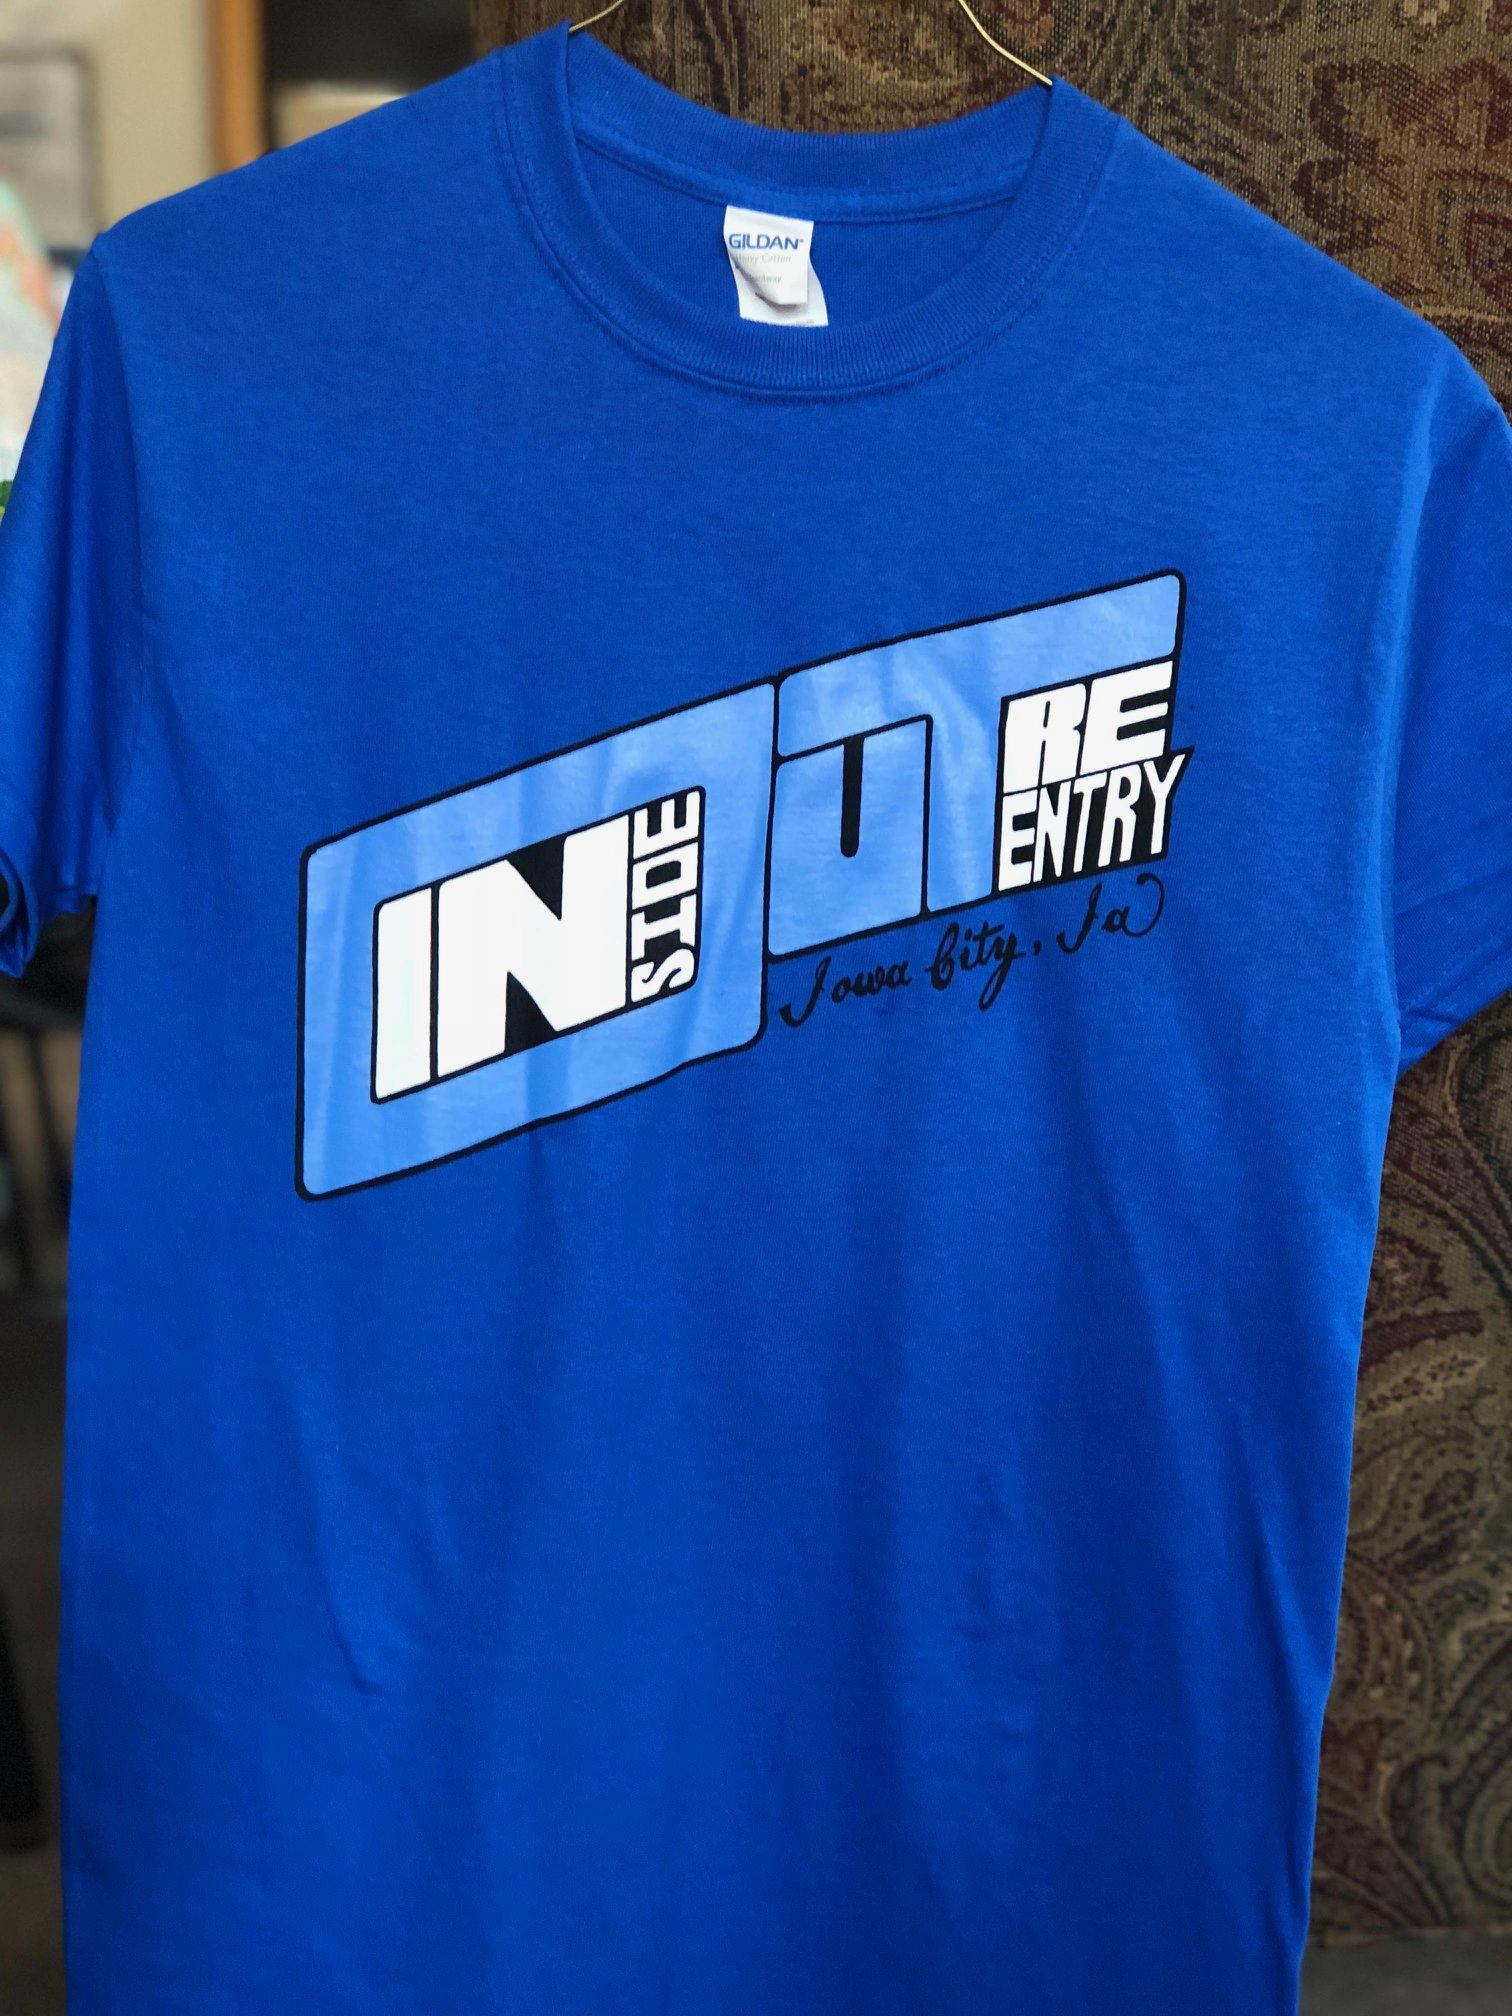 New Inside Out Reentry T-shirt – Inside Out Reentry Community